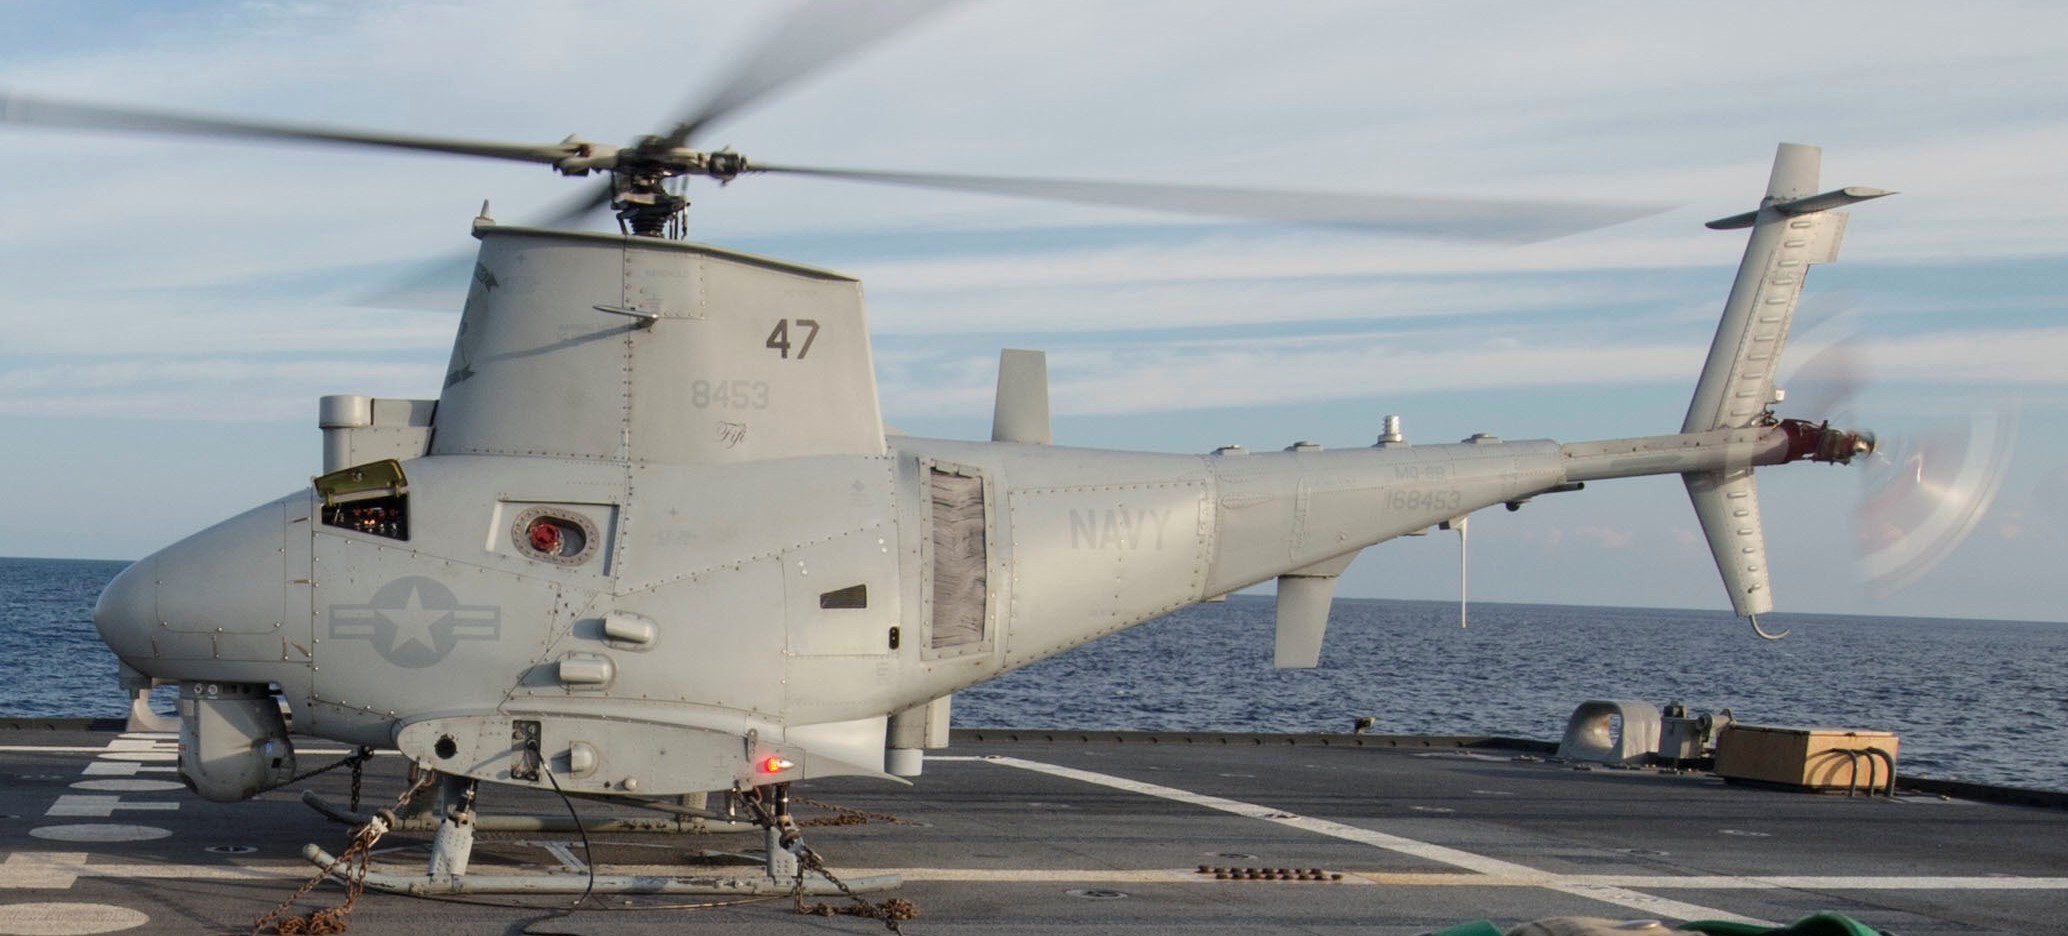 hsm-35 magicians helicopter maritime strike squadron mq-8b fire scout uav 15